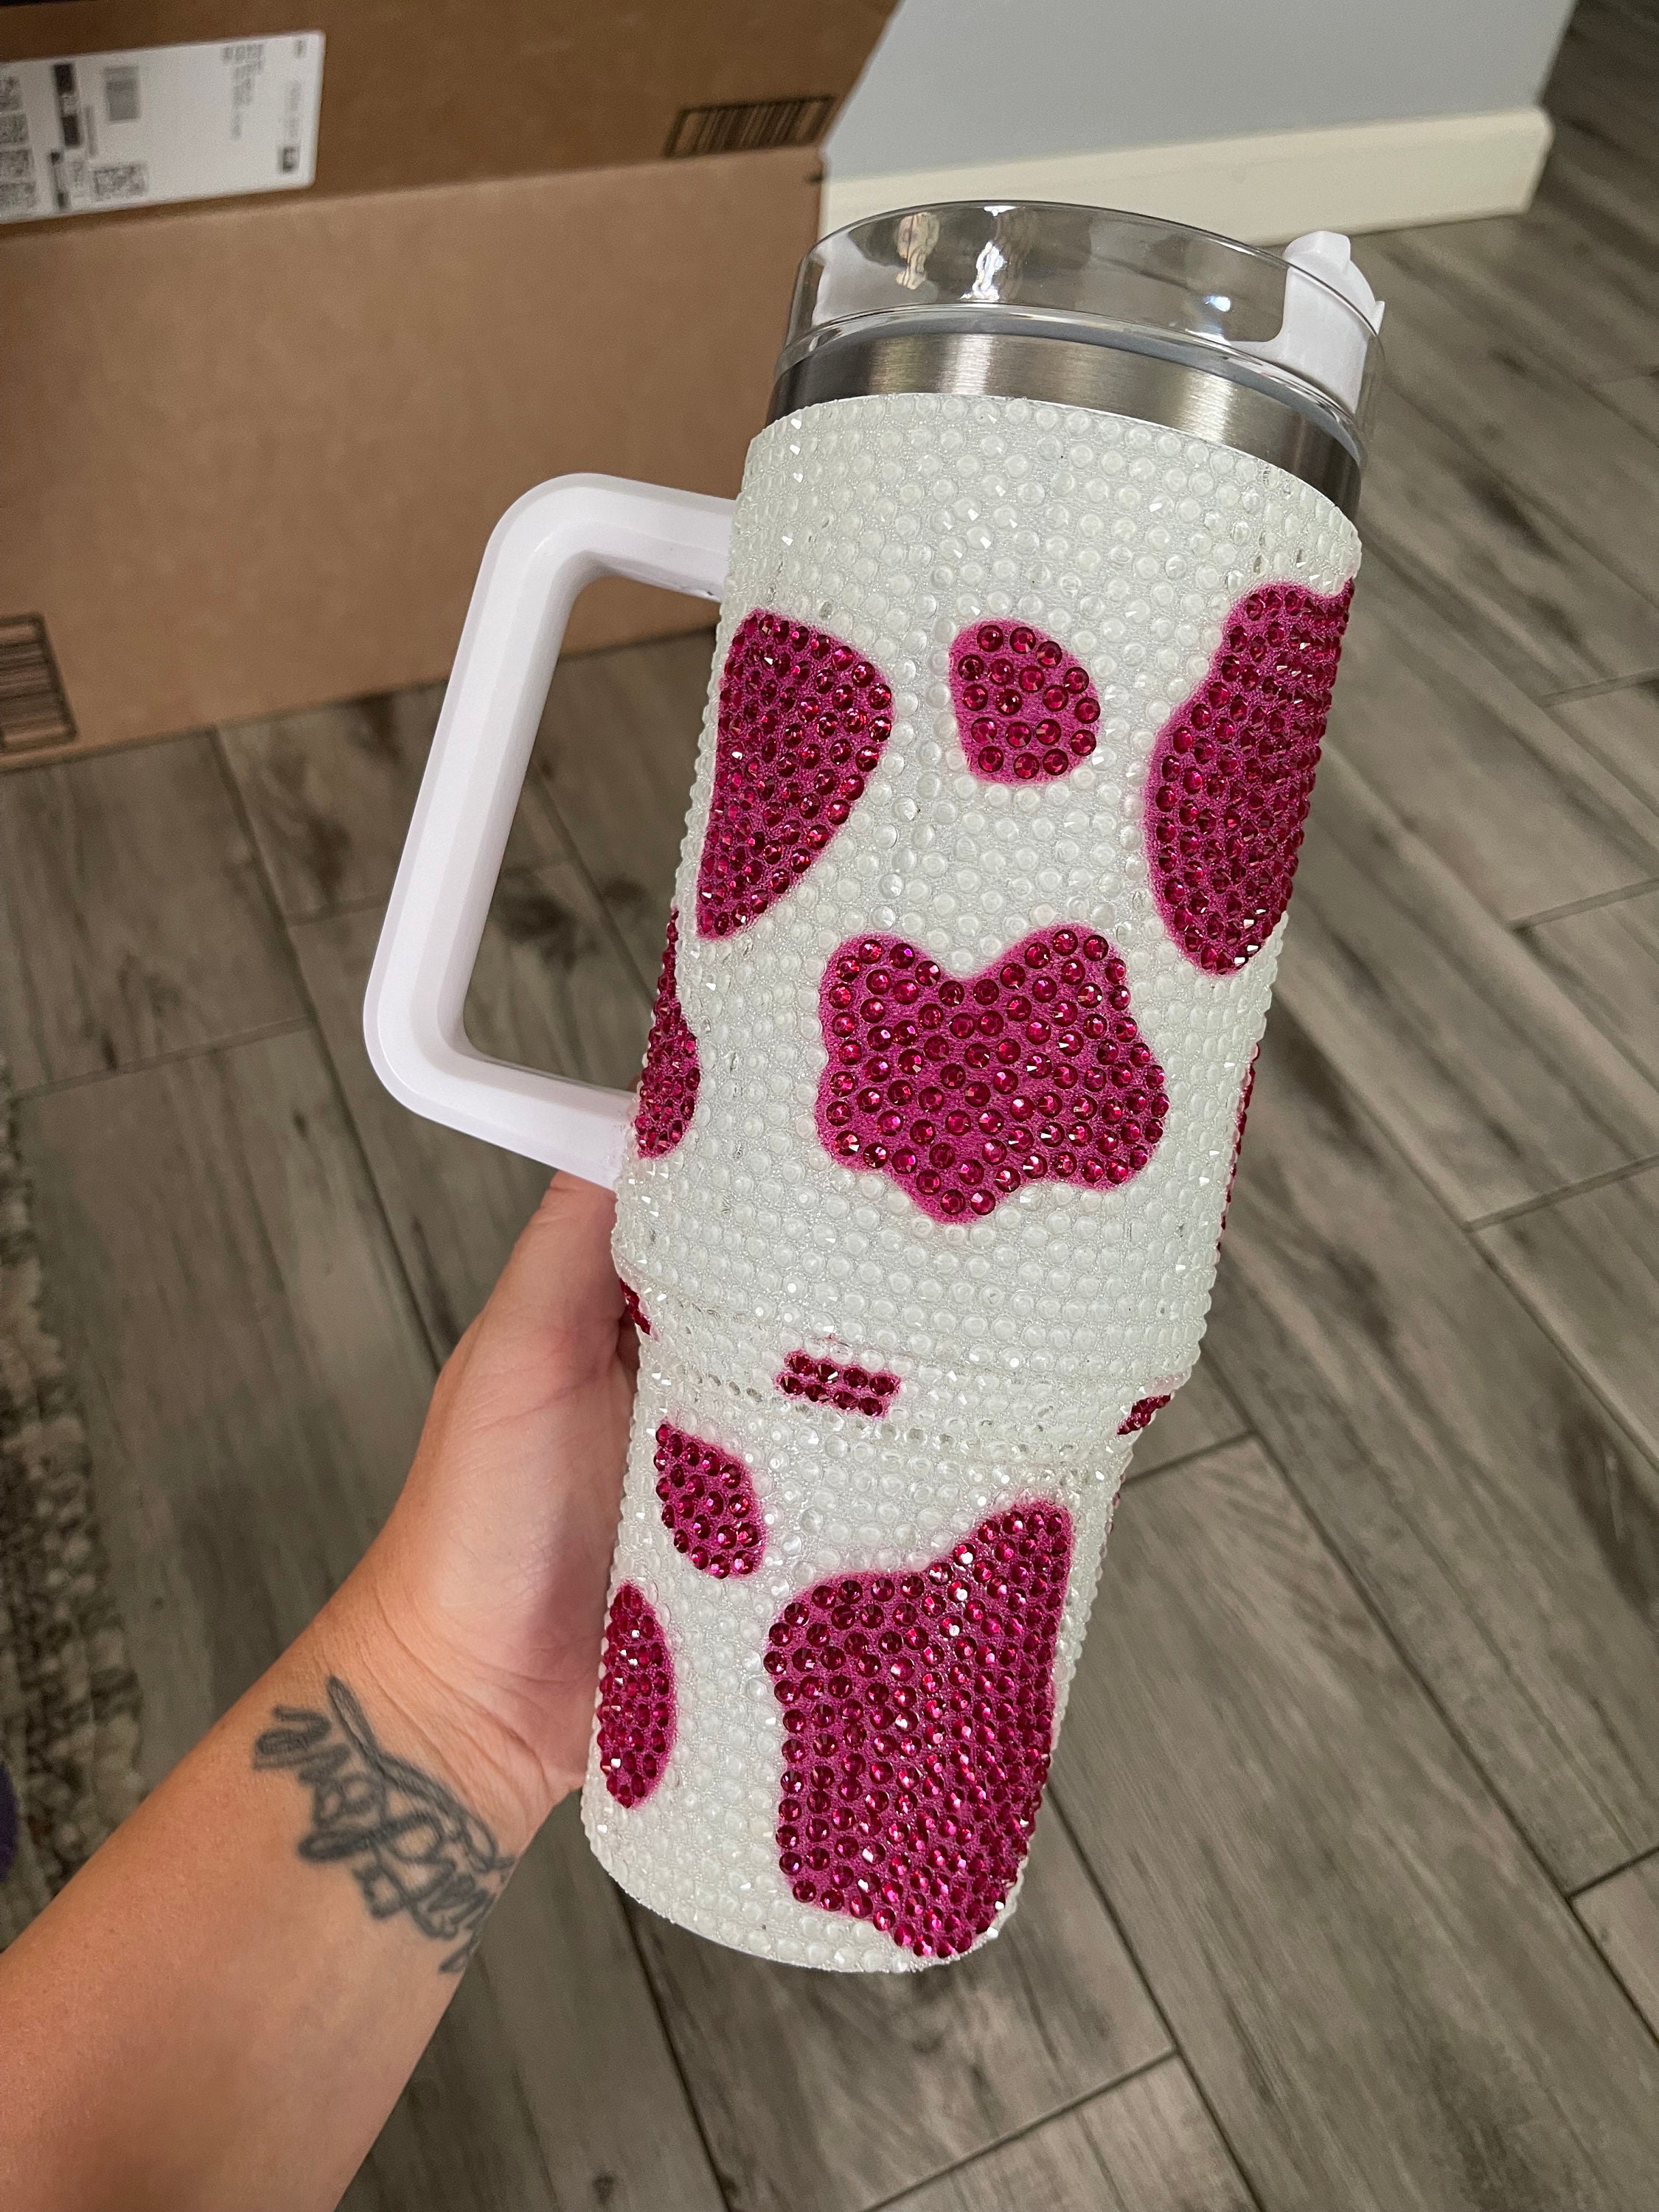 40oz Tumbler with Handle and Straw Cow Leopard Cup lid Insulated Leopard  Tumbler With Lid and Straws,Stainless Steel Coffee Tumbler with  Handle,Double Vacuum Leak Proof Coffee Travel Mug Water Bottle For Home